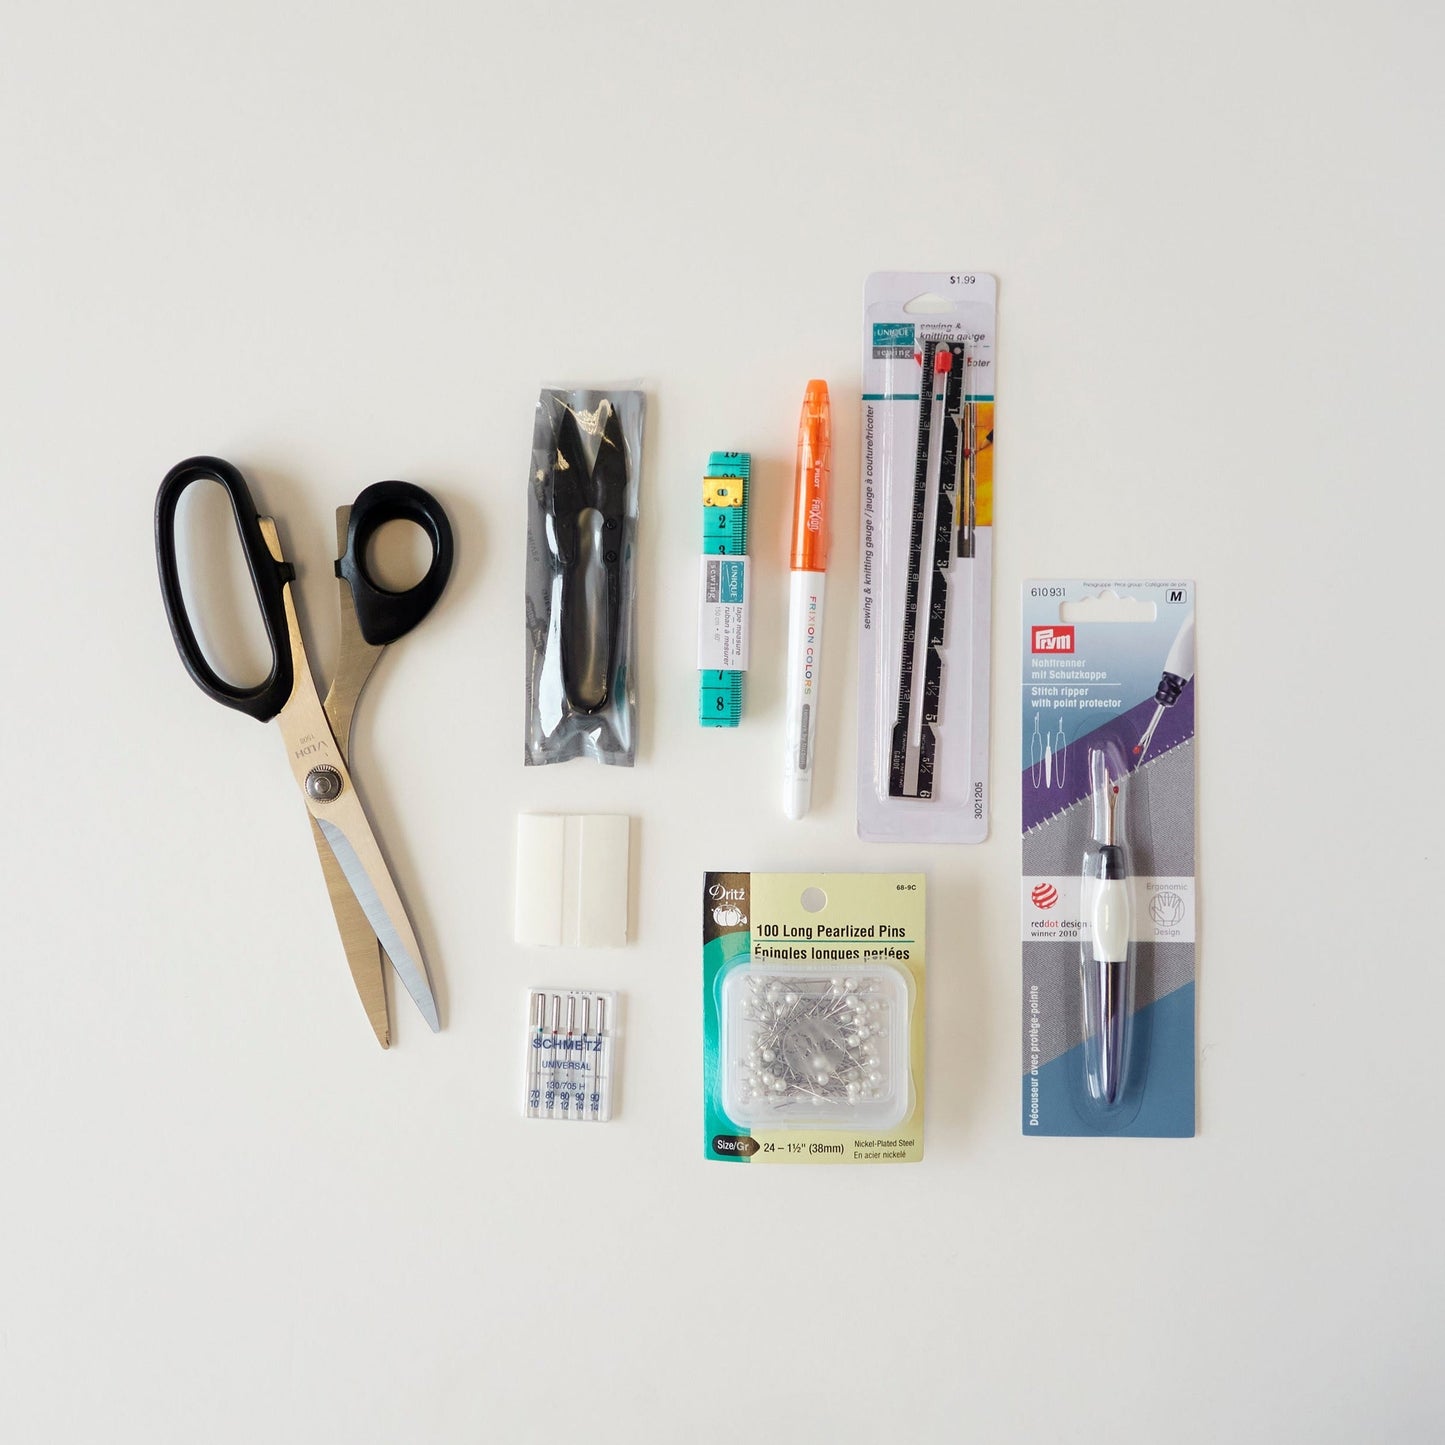 Sewing kit - Day camp - PURCHASE